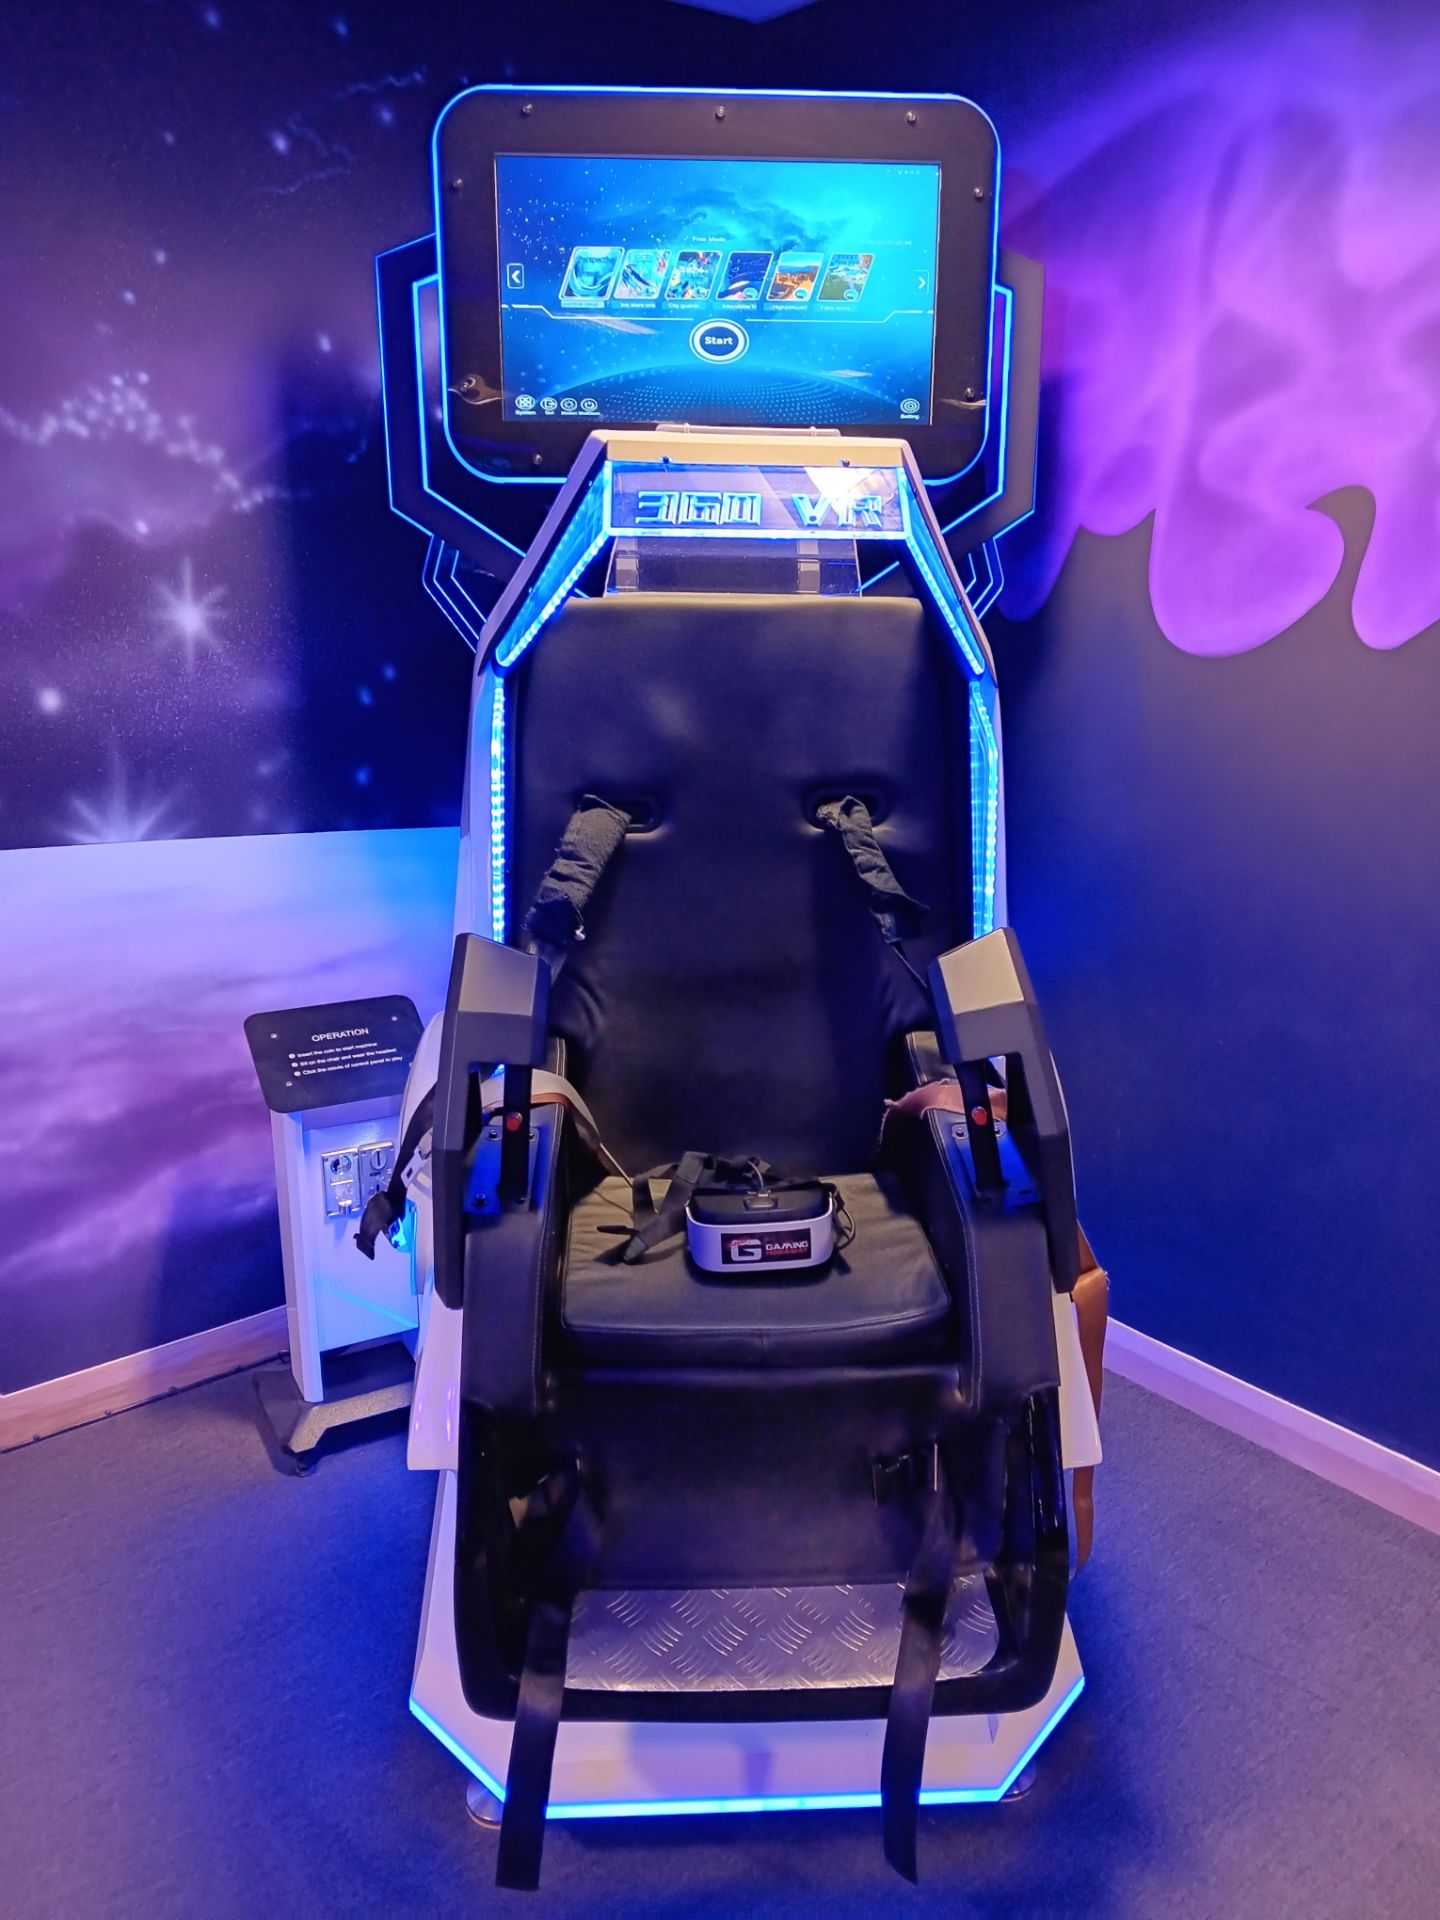 Owatch 360 Degree Rotating VR Chair Roller Coaster Simulator – Cost New £14,400 – Buyer to - Image 3 of 3